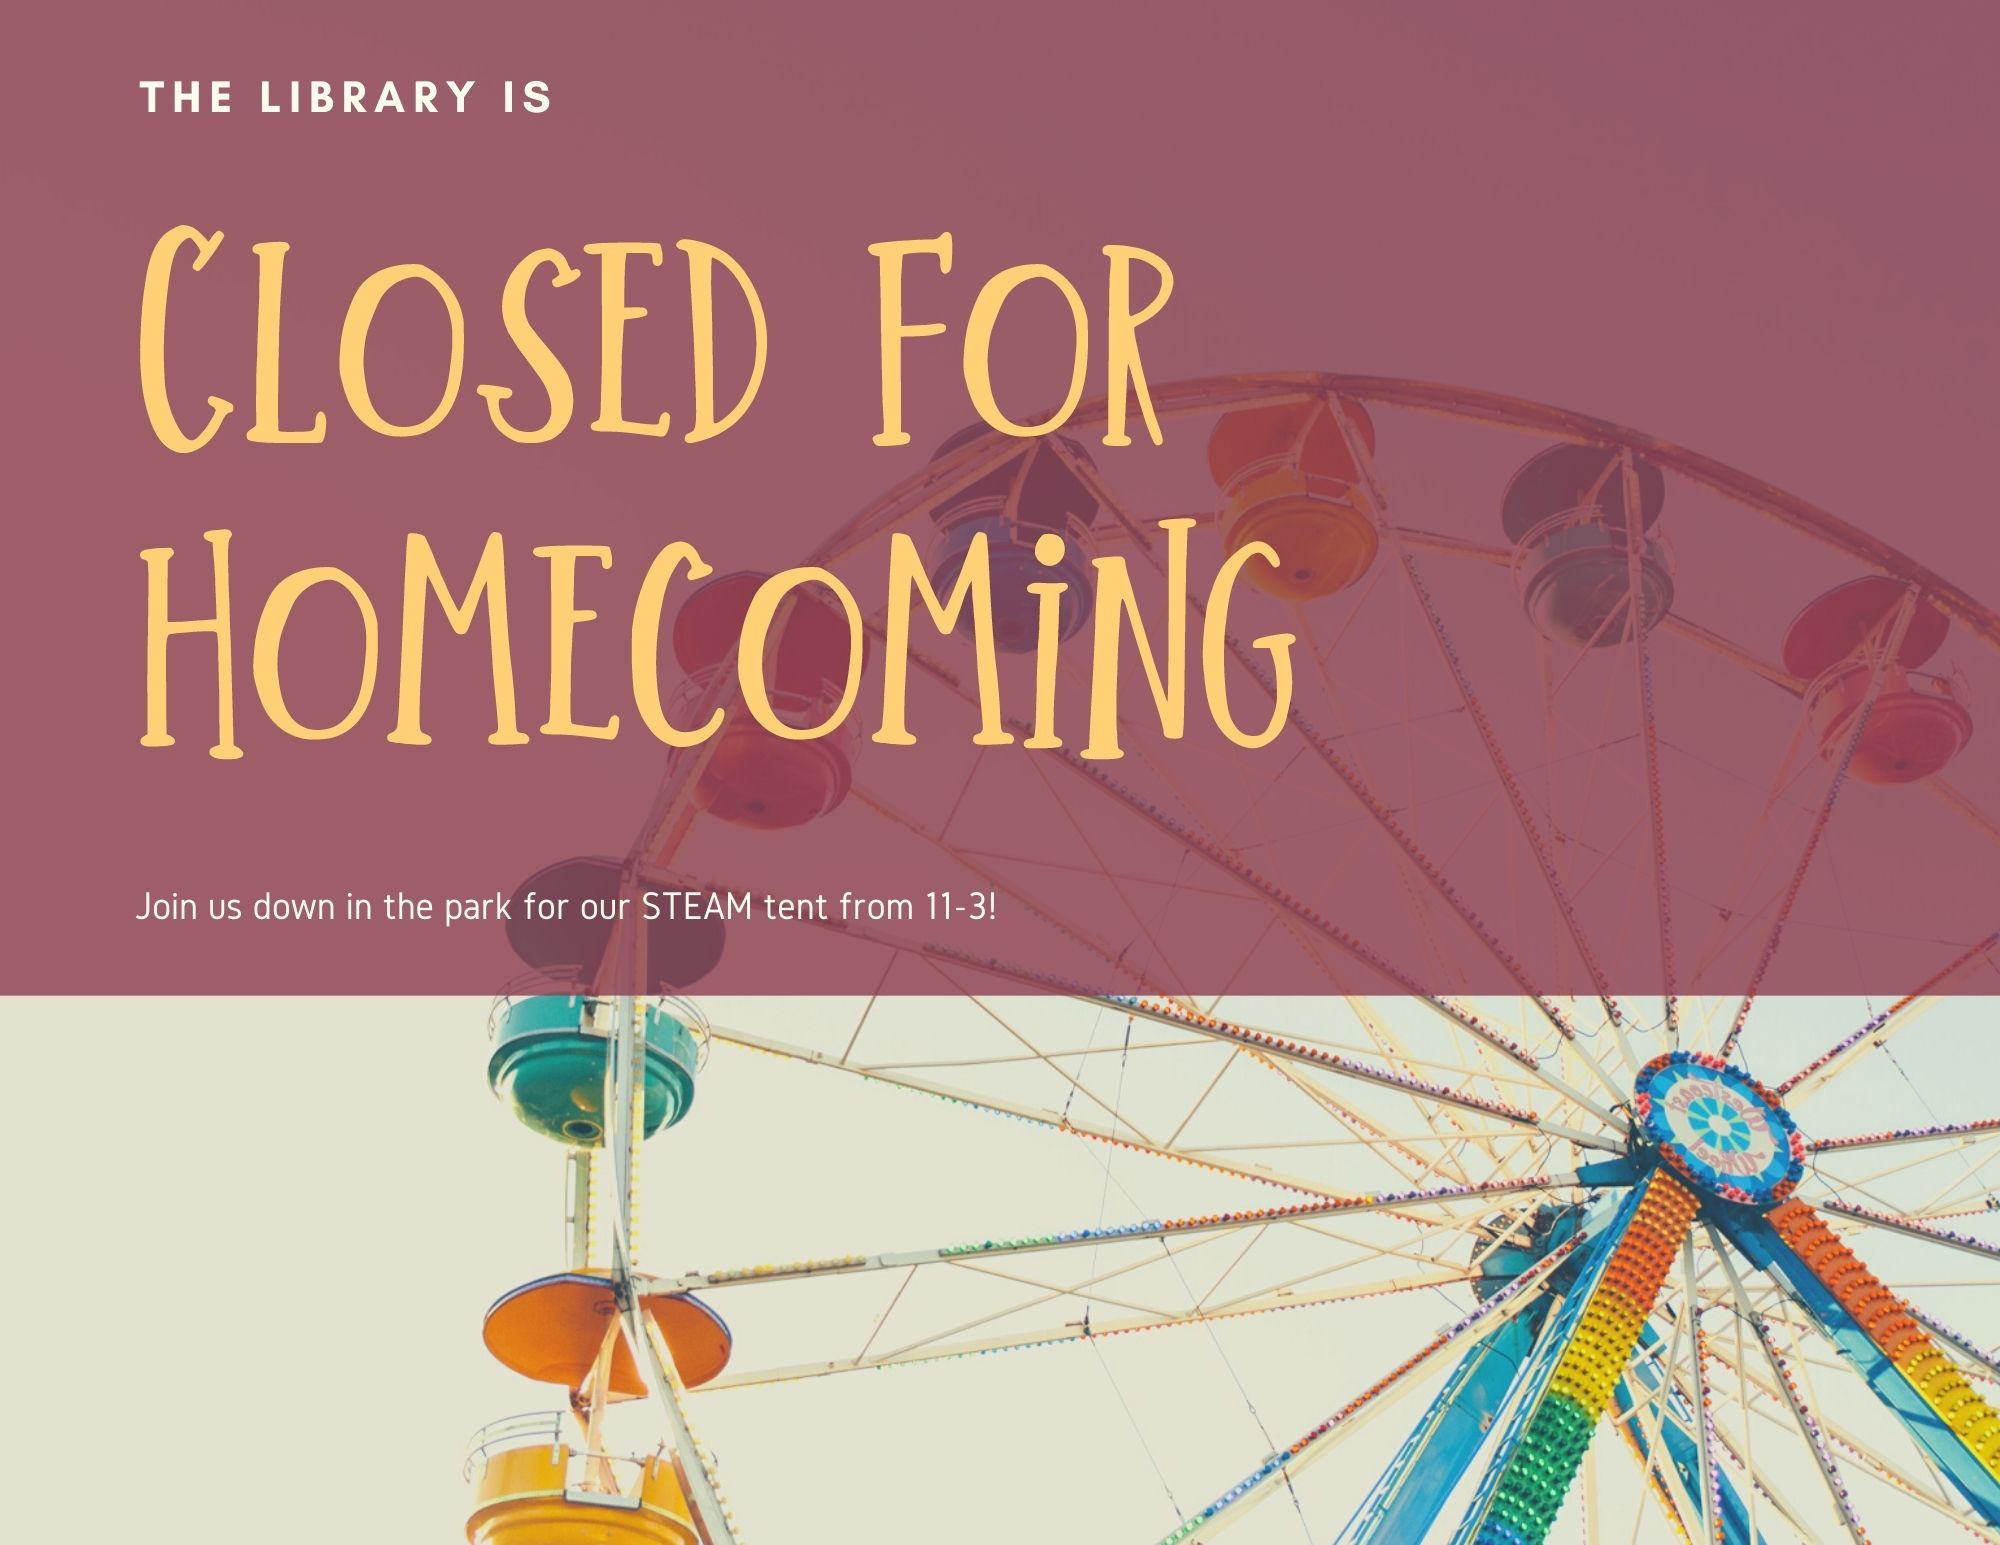 Closed for Homecoming